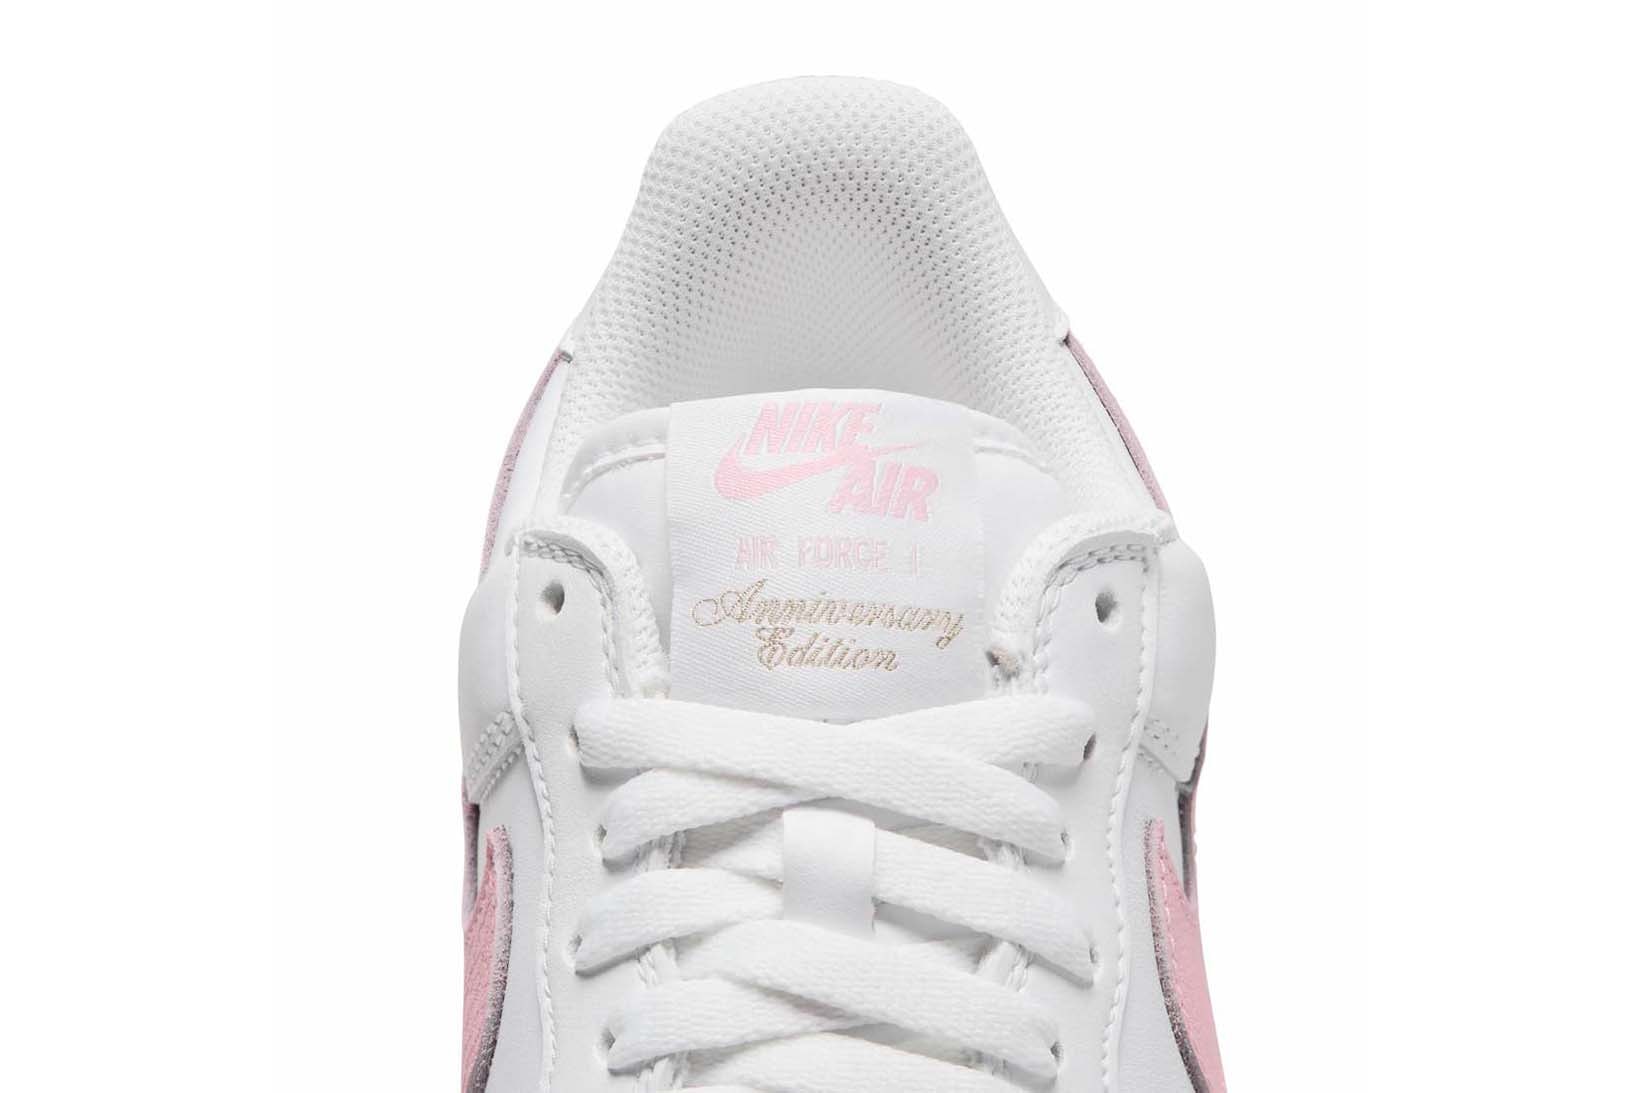 Nike Air Force 1 Low Since 82 White Pink Toothbrush DM0576-101 Price Release Date